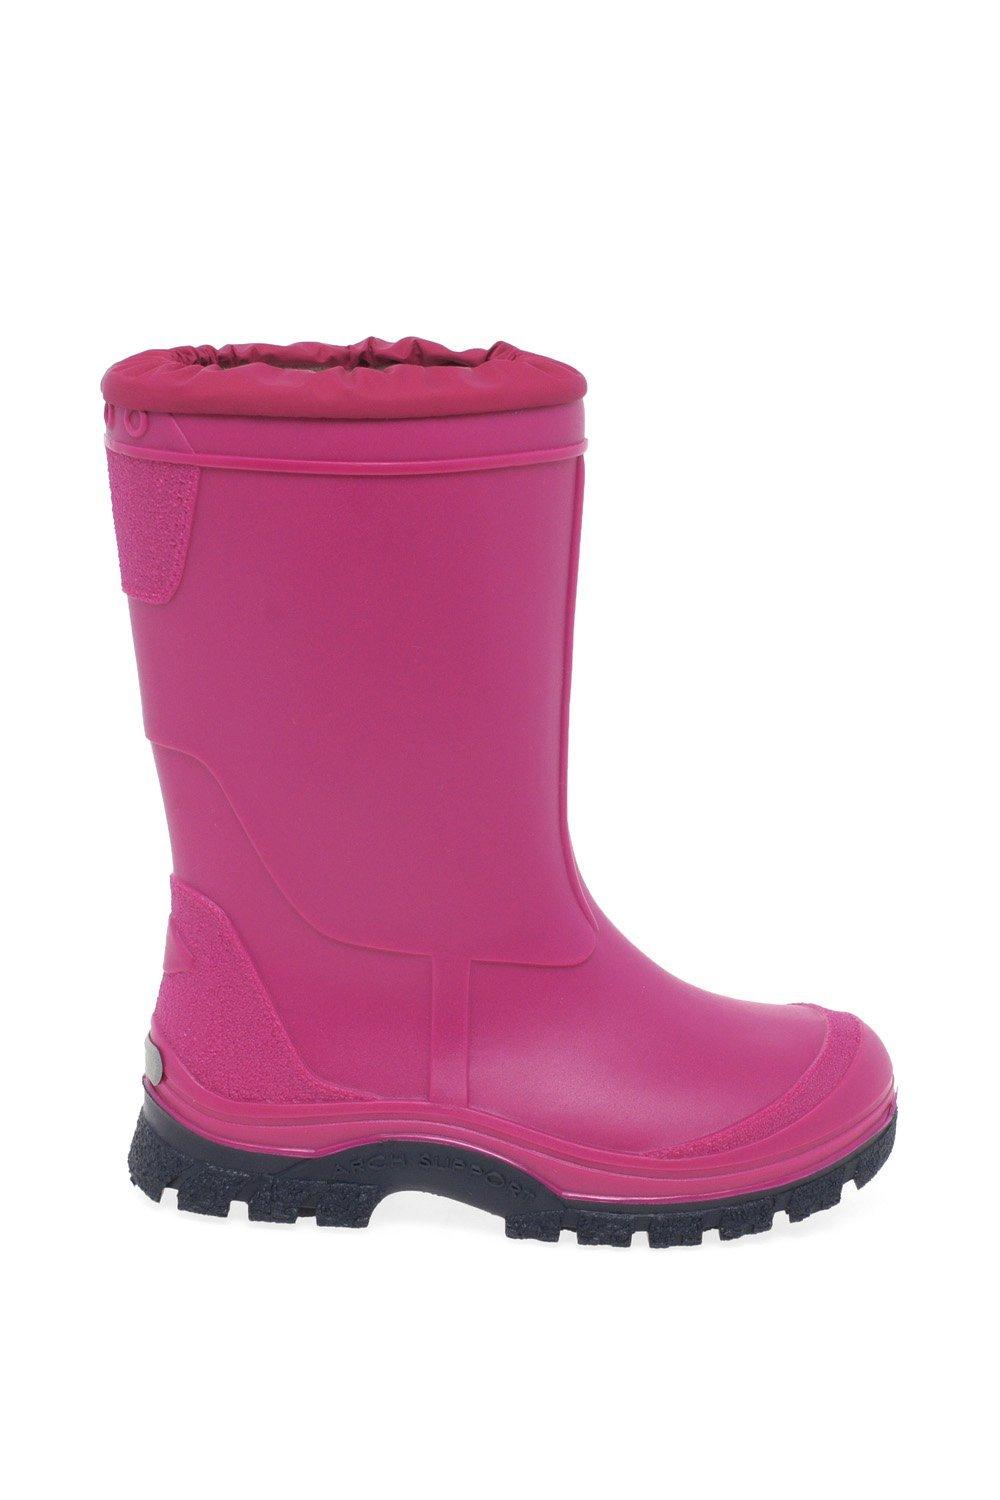 ’Childrens’ Mud Buster Wellingtons